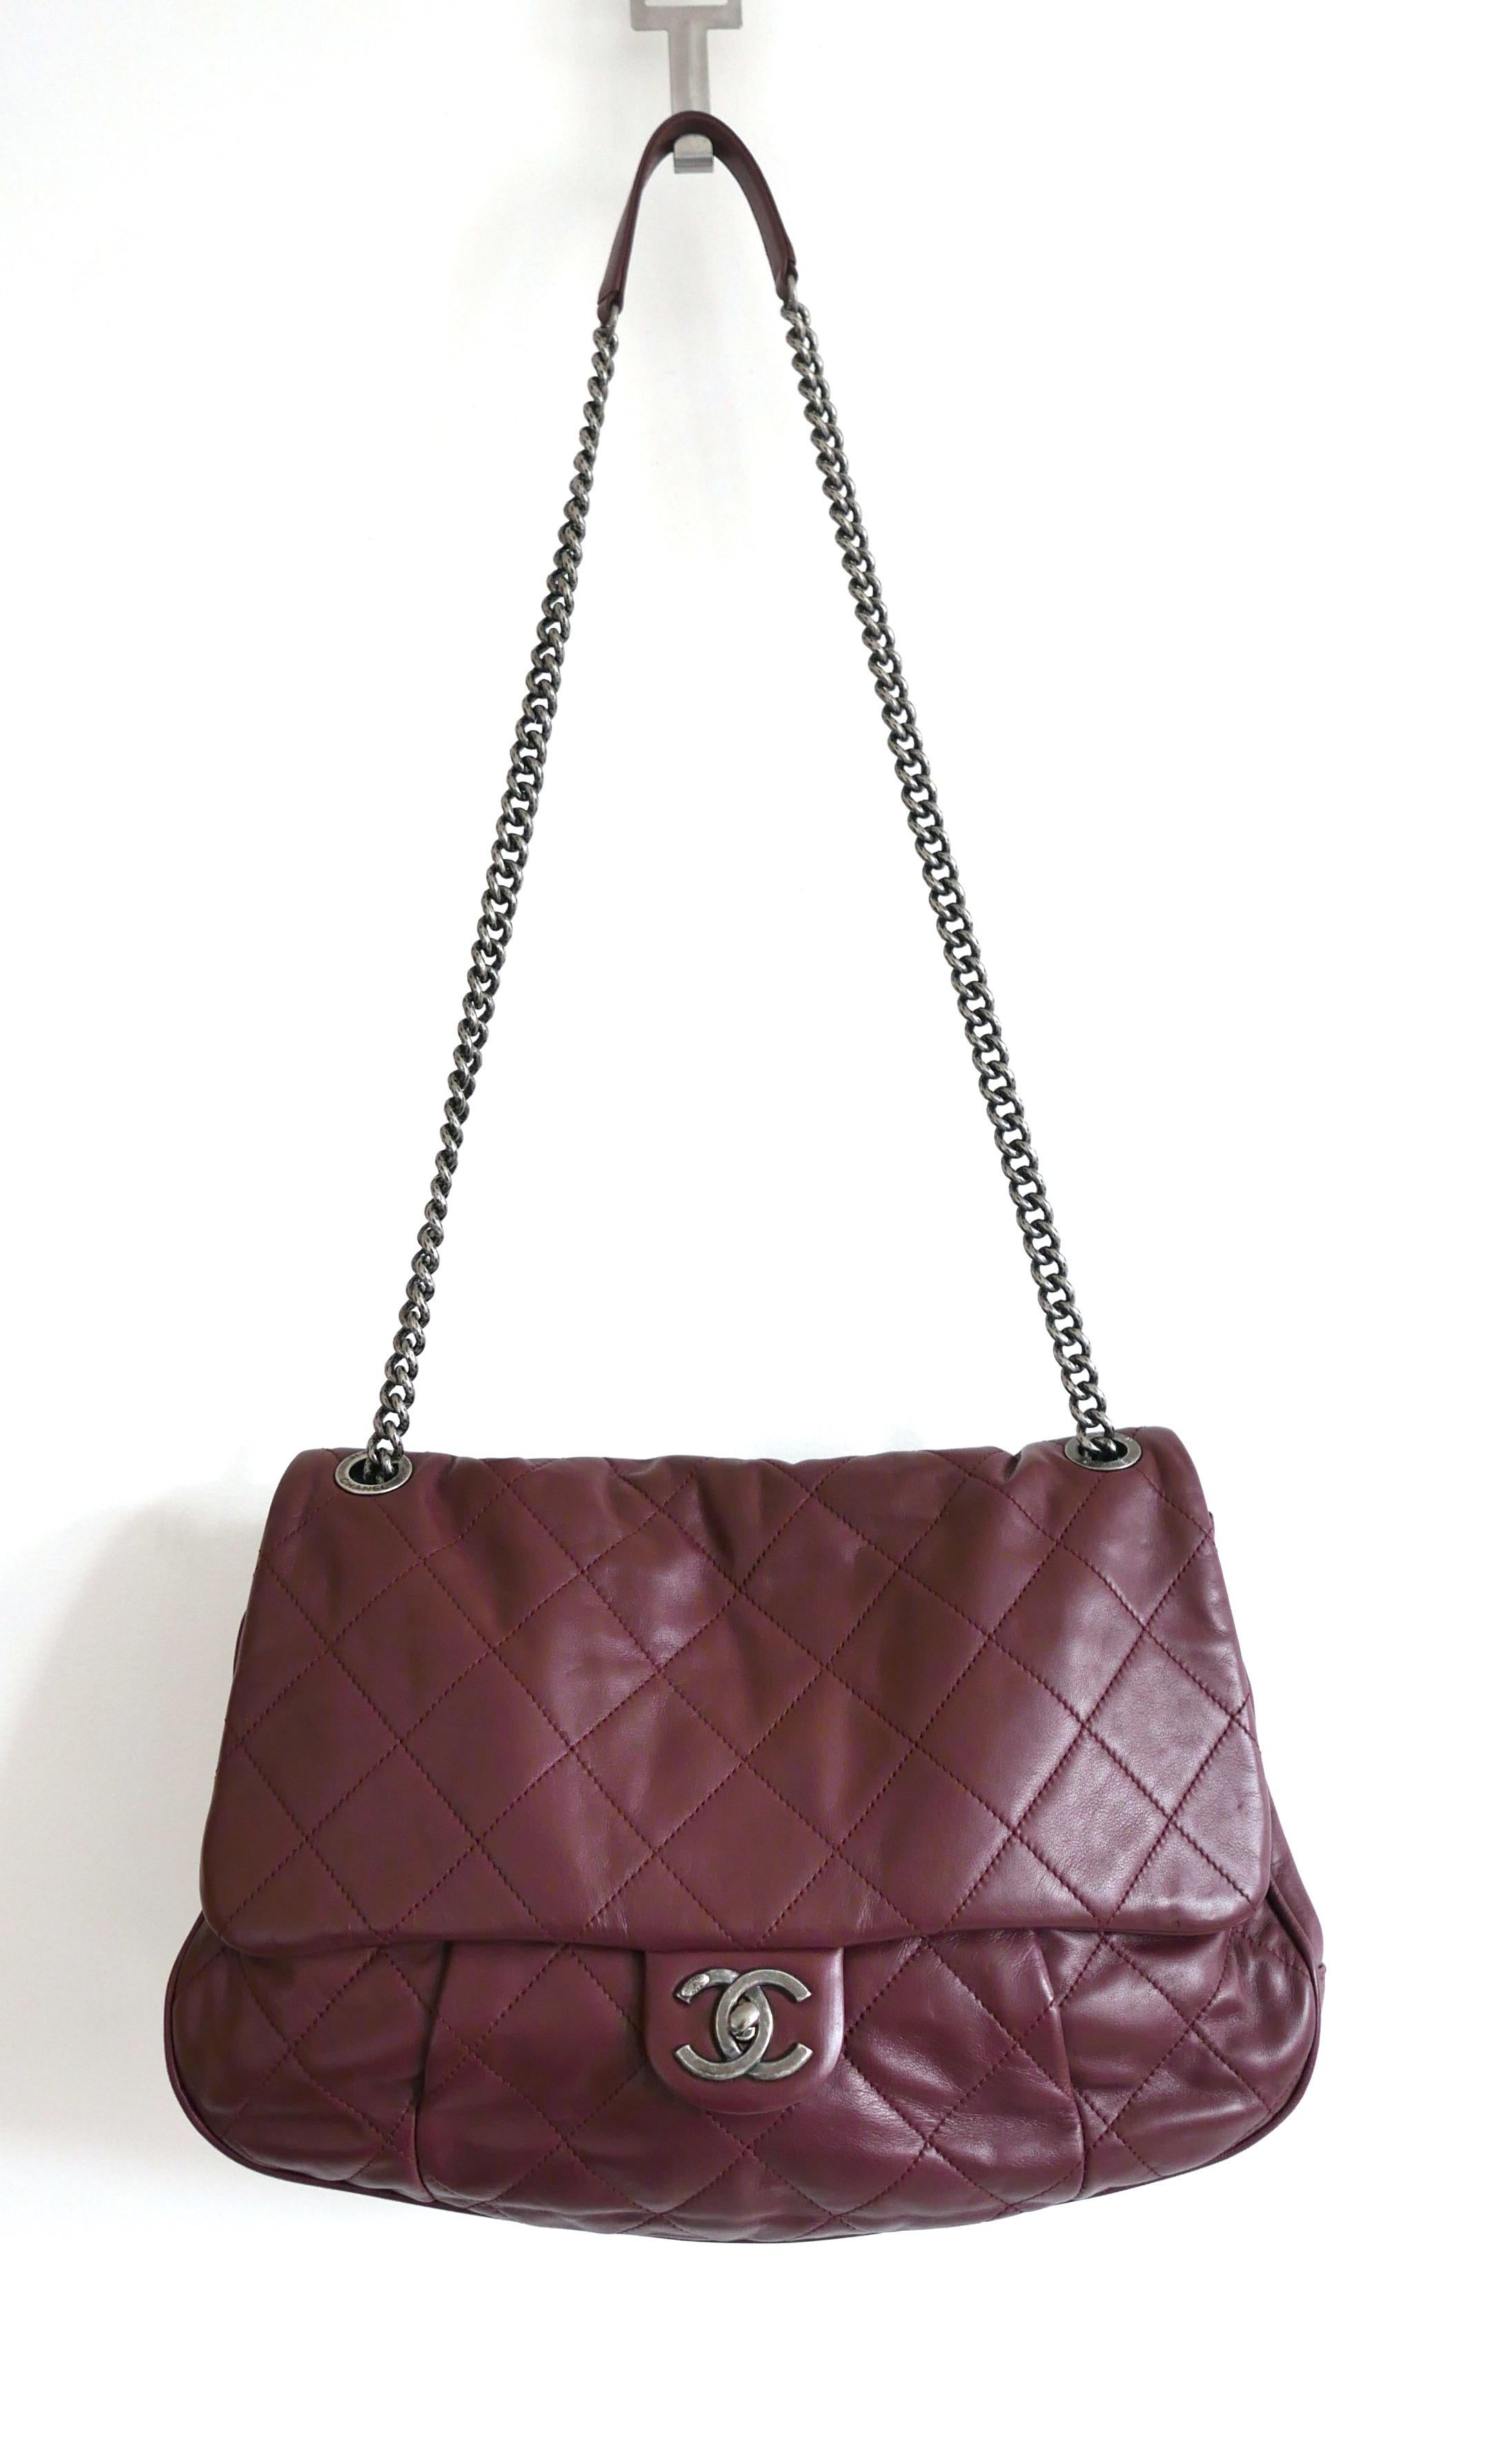 Stunning Chanel Coco Pleats Flap Bag - used a couple of times and comes with dustbag. Crafted from soft burgundy quilted calfskin leather, fit has a lovely, squishy and super roomy shape with pleated front detail, dual chain link strap with leather